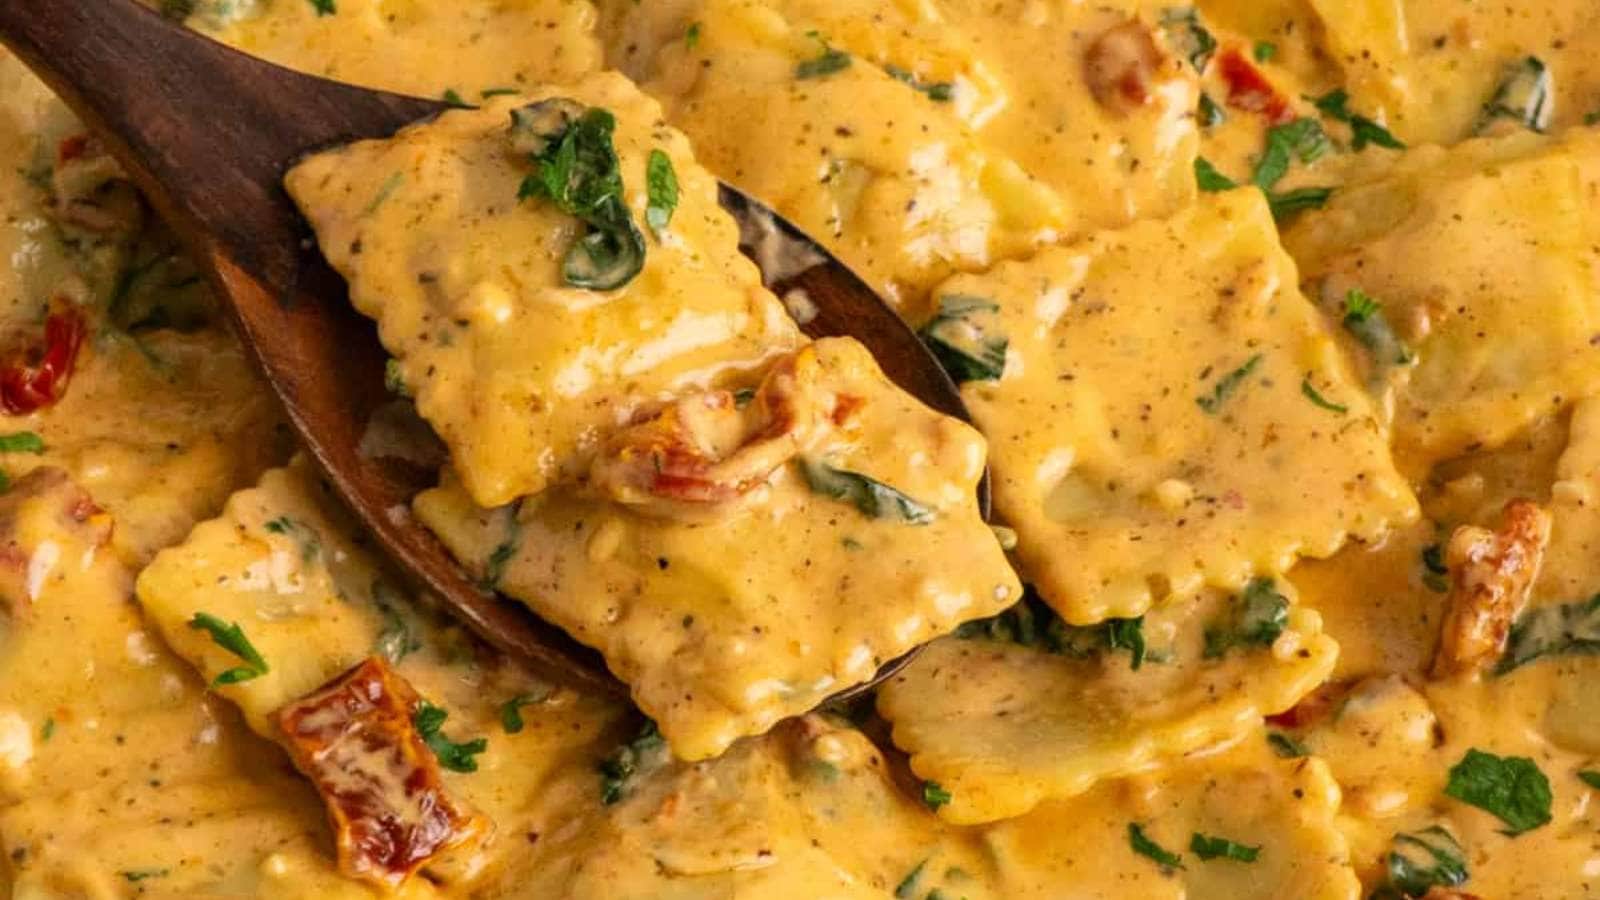 Creamy Tuscan Ravioli
recipe by The Cooking Duo.